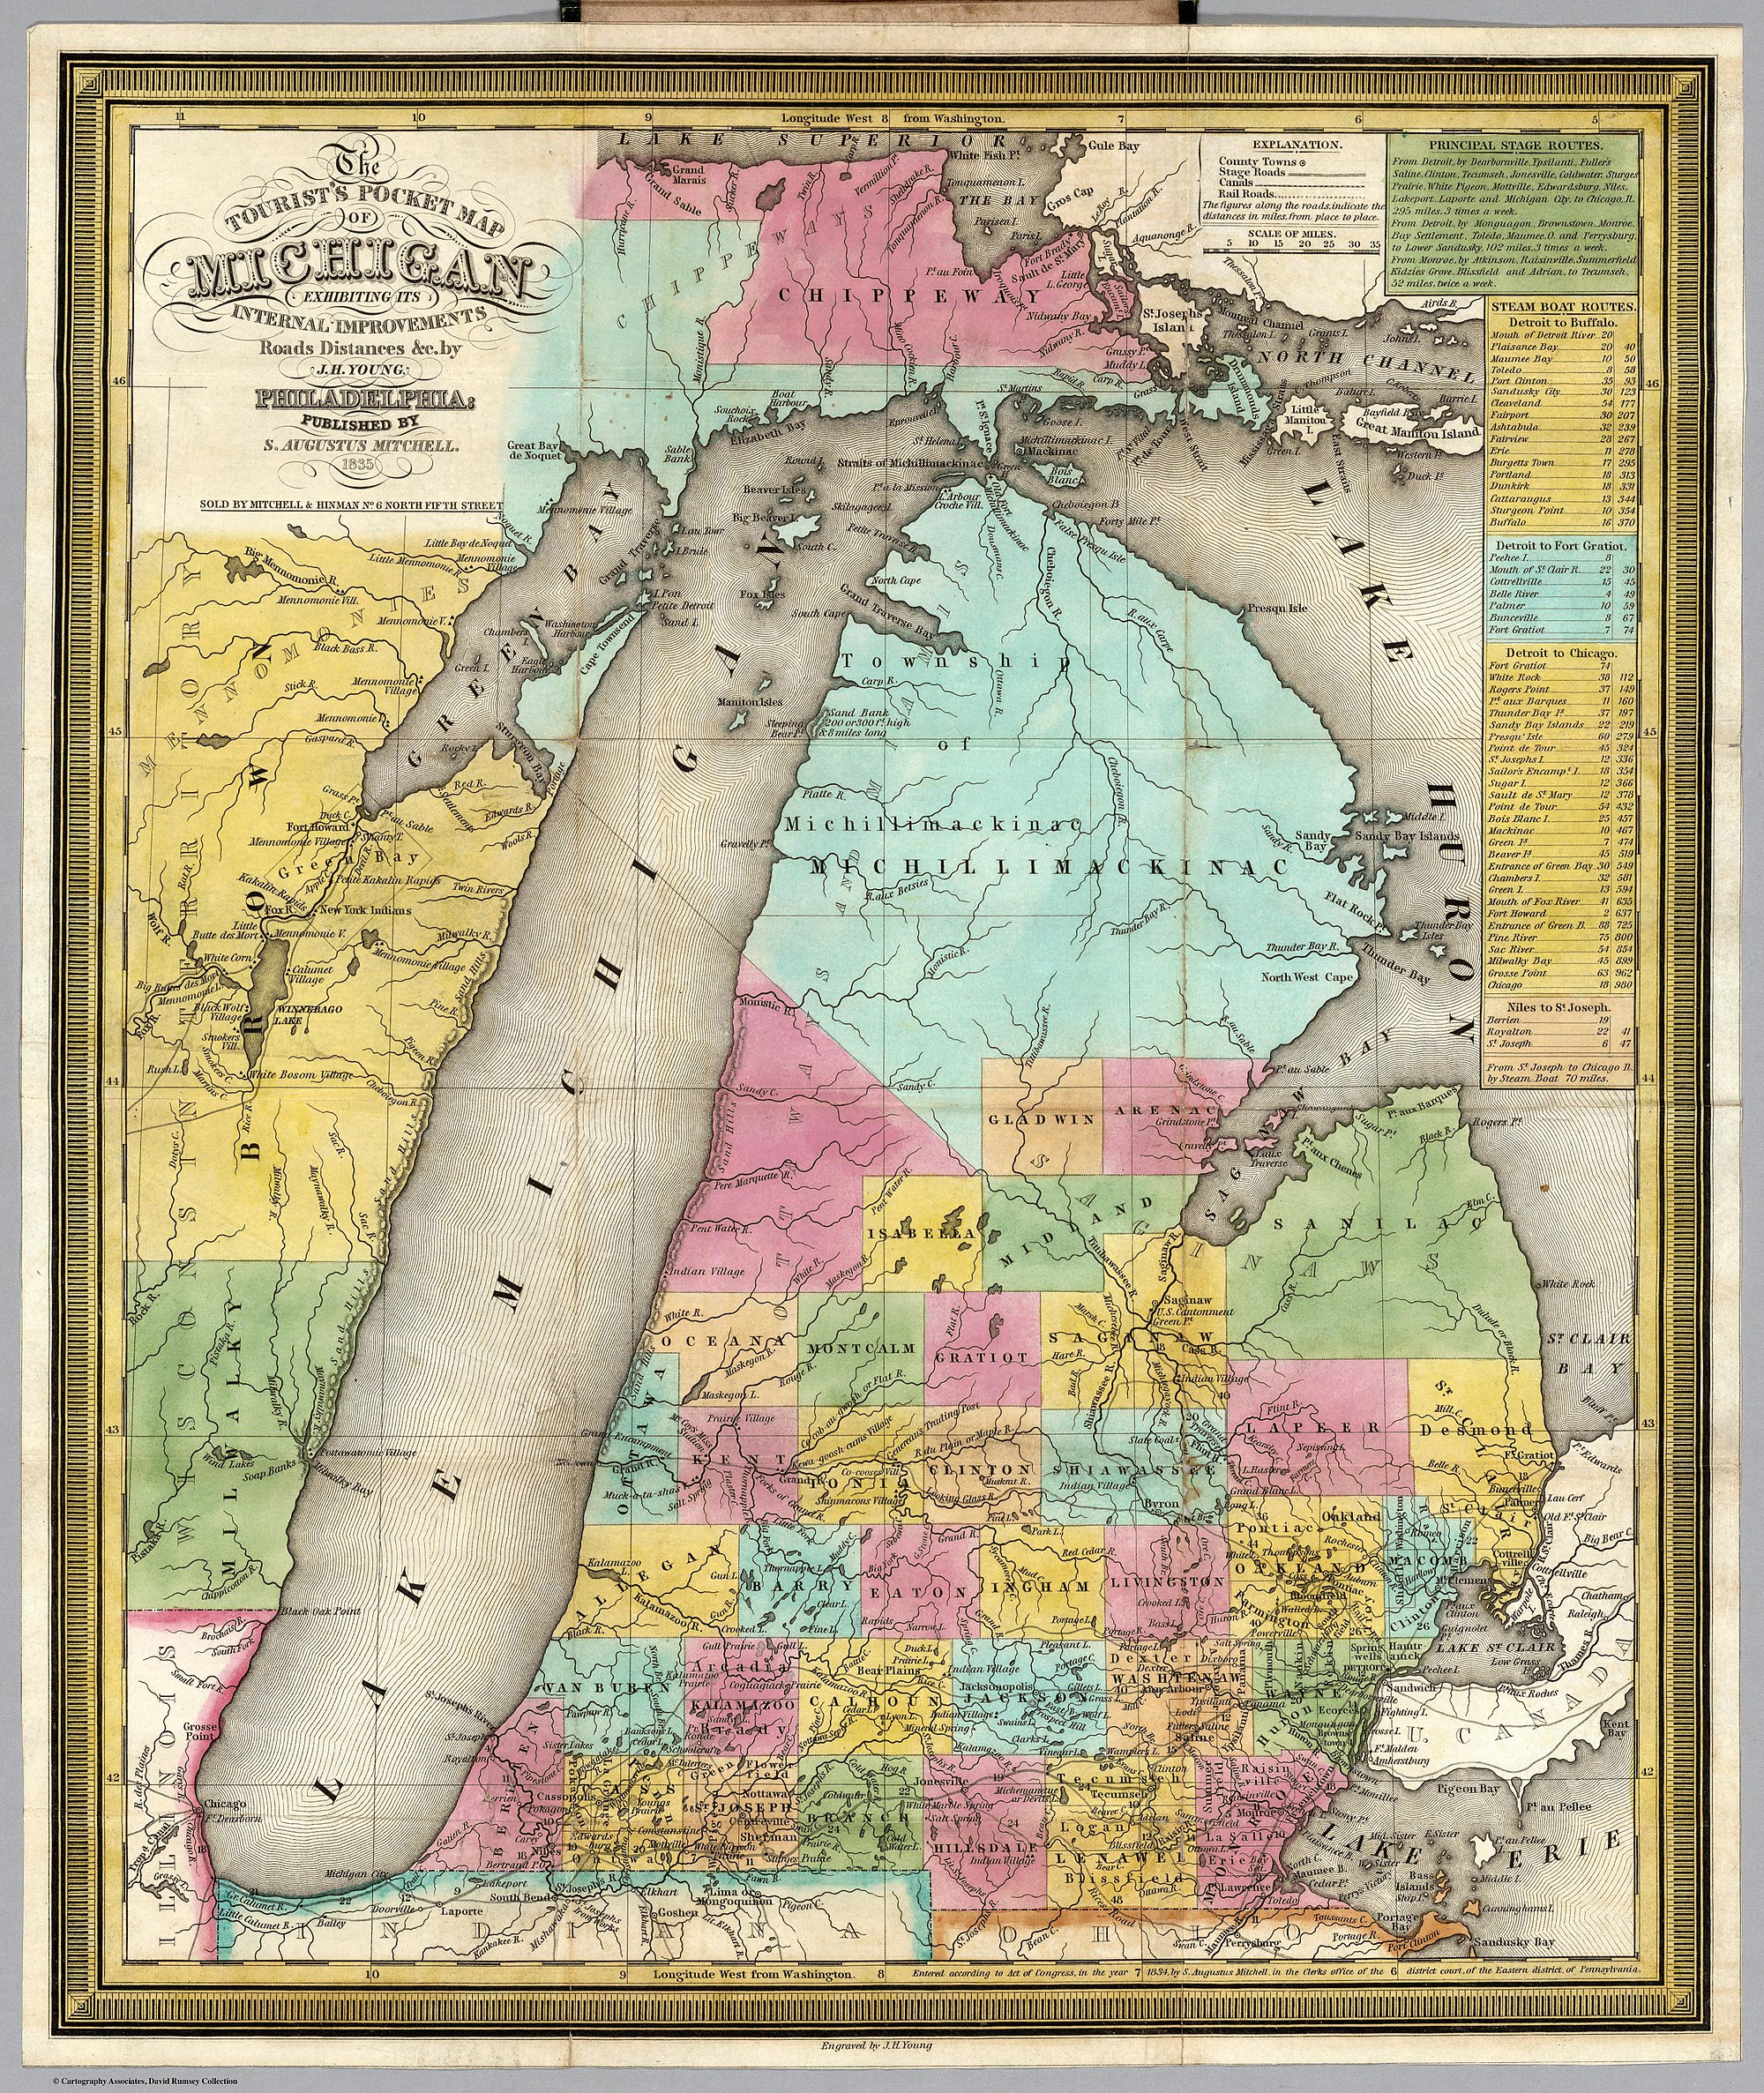 Green Bay and Lake Winnebago on the 1835 Tourist's Pocket Map of Michigan, among the "Mennomonie" villages of Wisconsin Territory